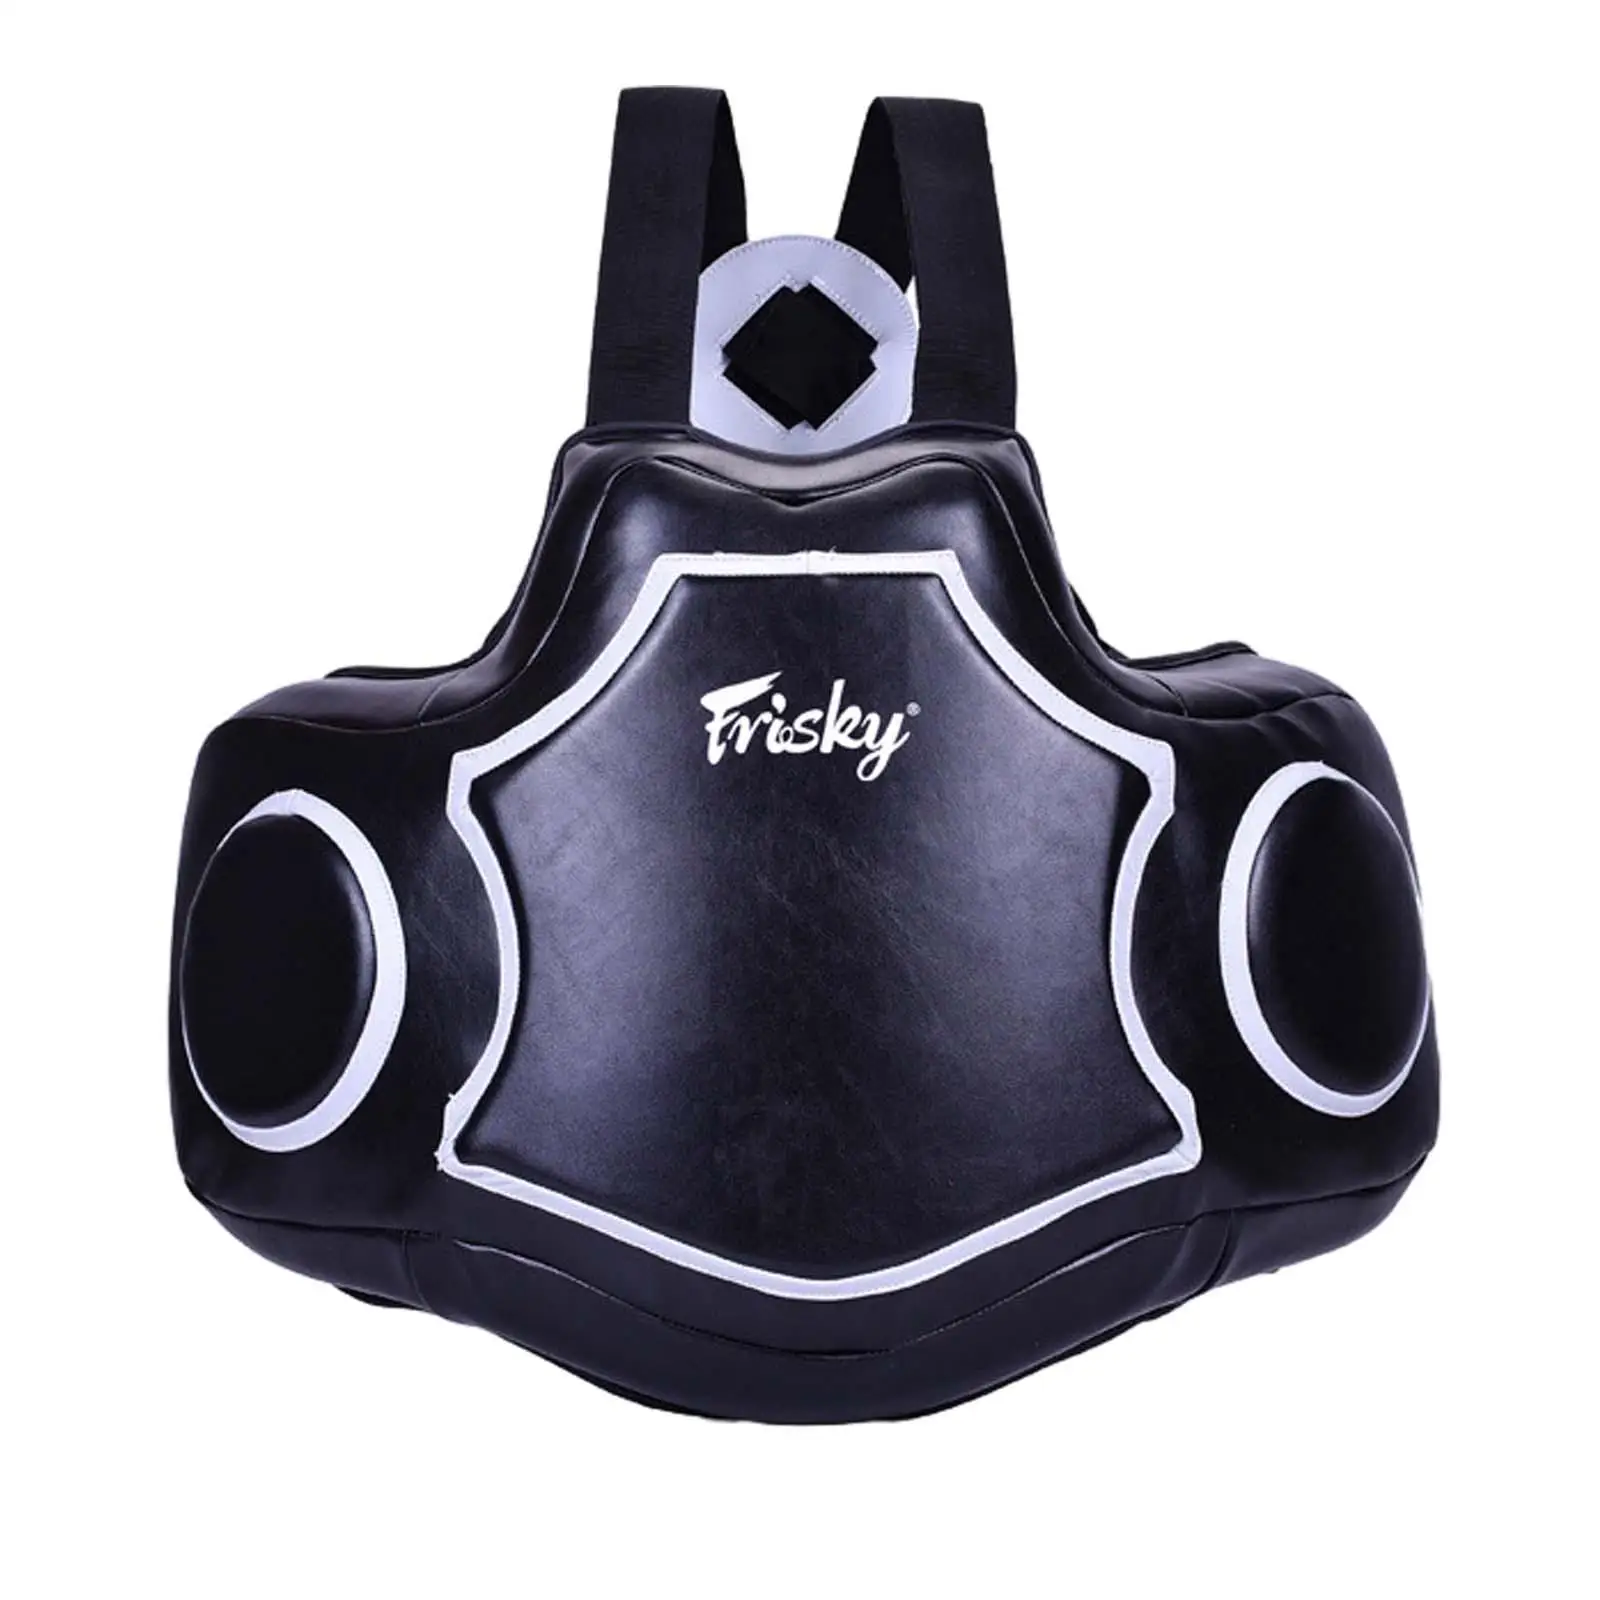 Boxing Body Protector Protective Equipment for Mma Martial Arts Sparring